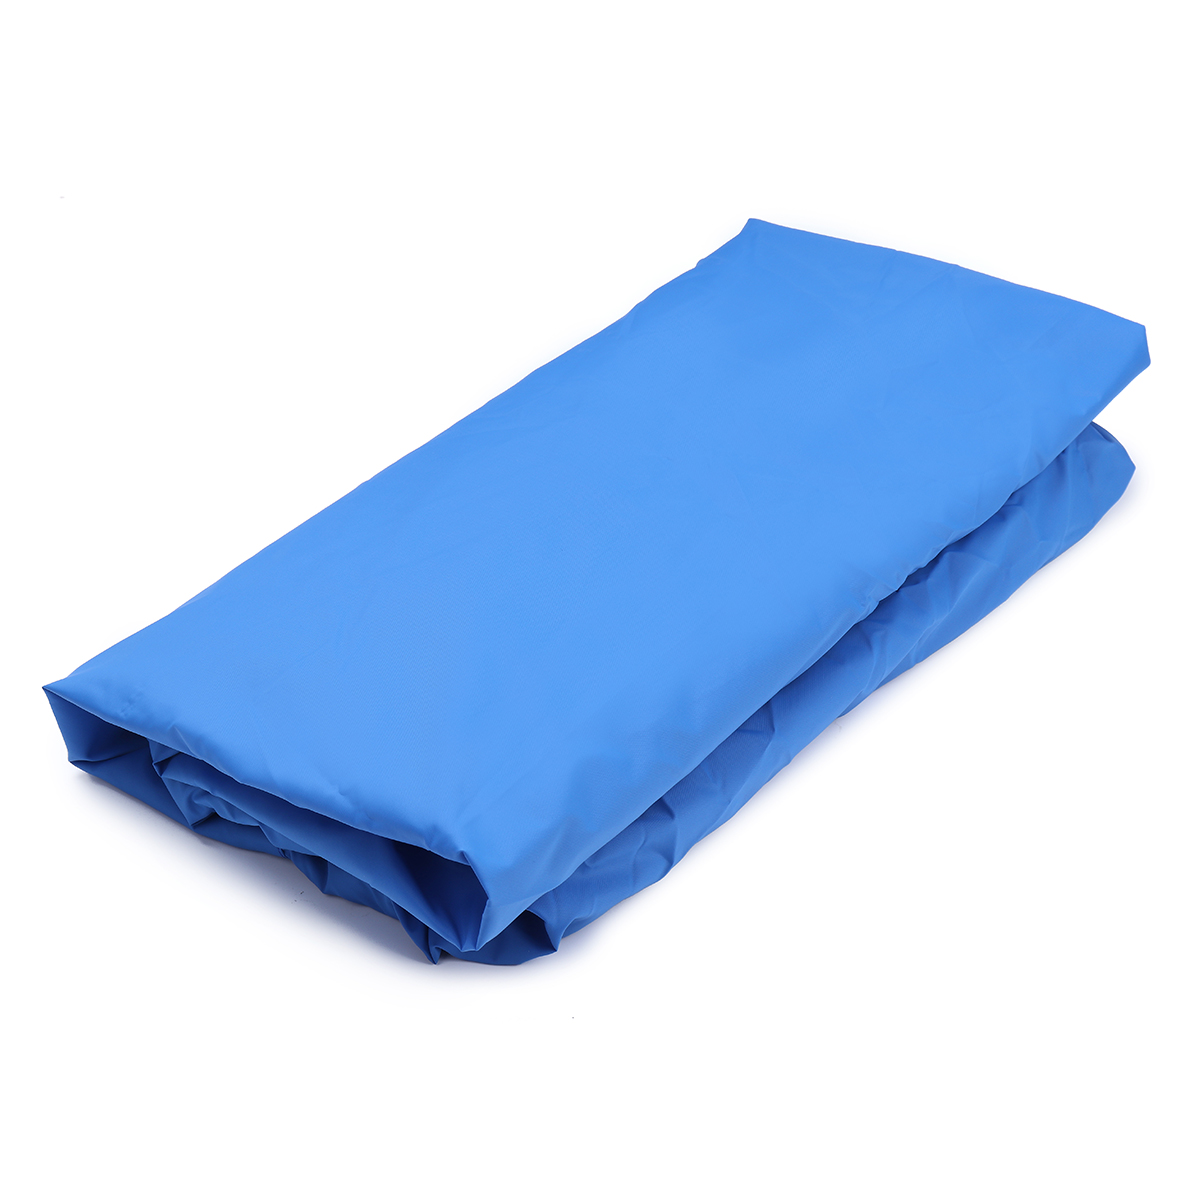 Motorcycle Cover Waterproof UV Rain Dust Protection Blue 1210Mmx1100Mmx640Mm/560Mm